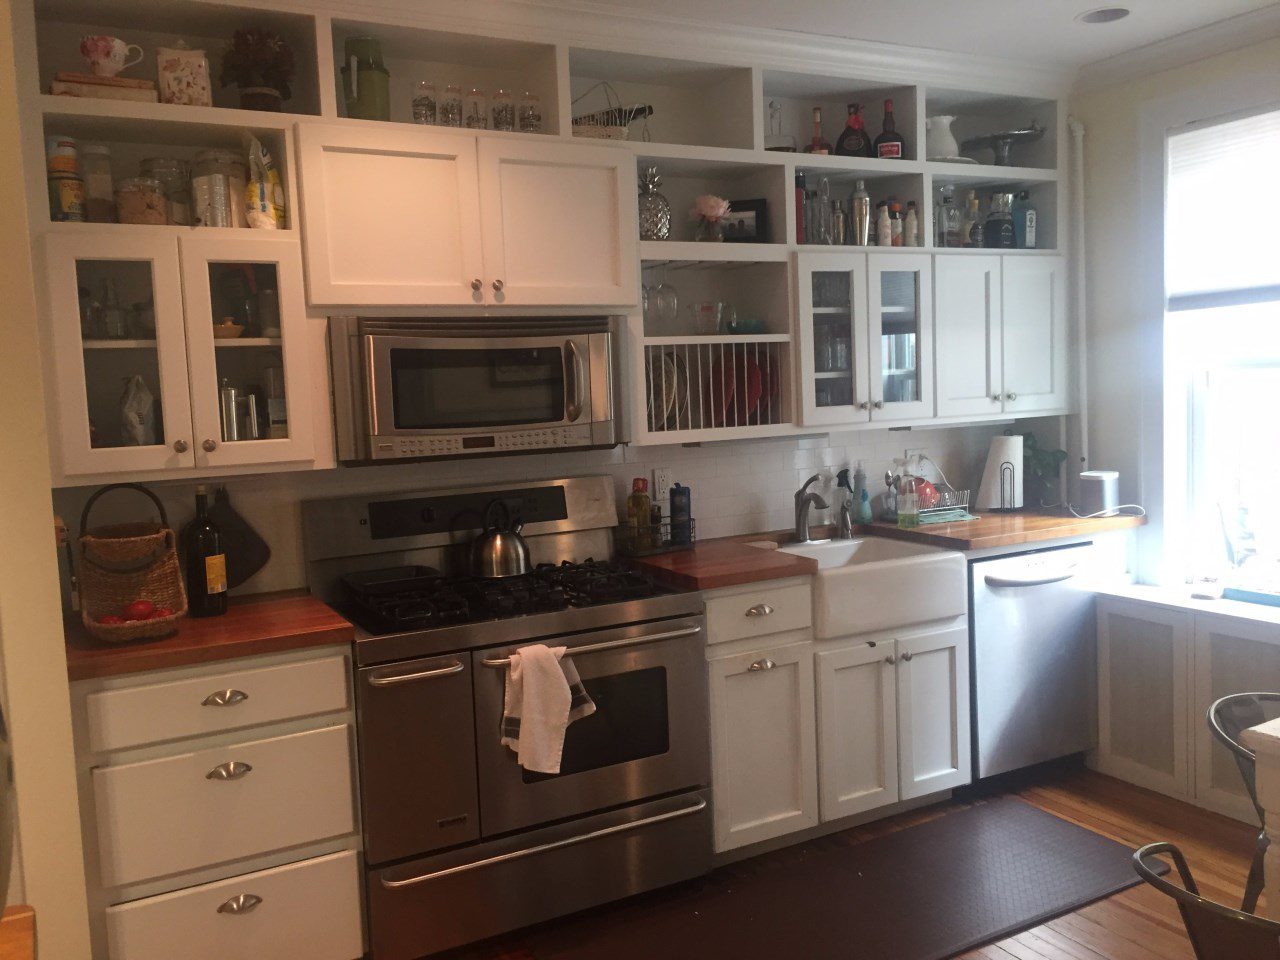 Historic District Brownstone Remodel Project In Process History Revitalized Kitchen Before 02